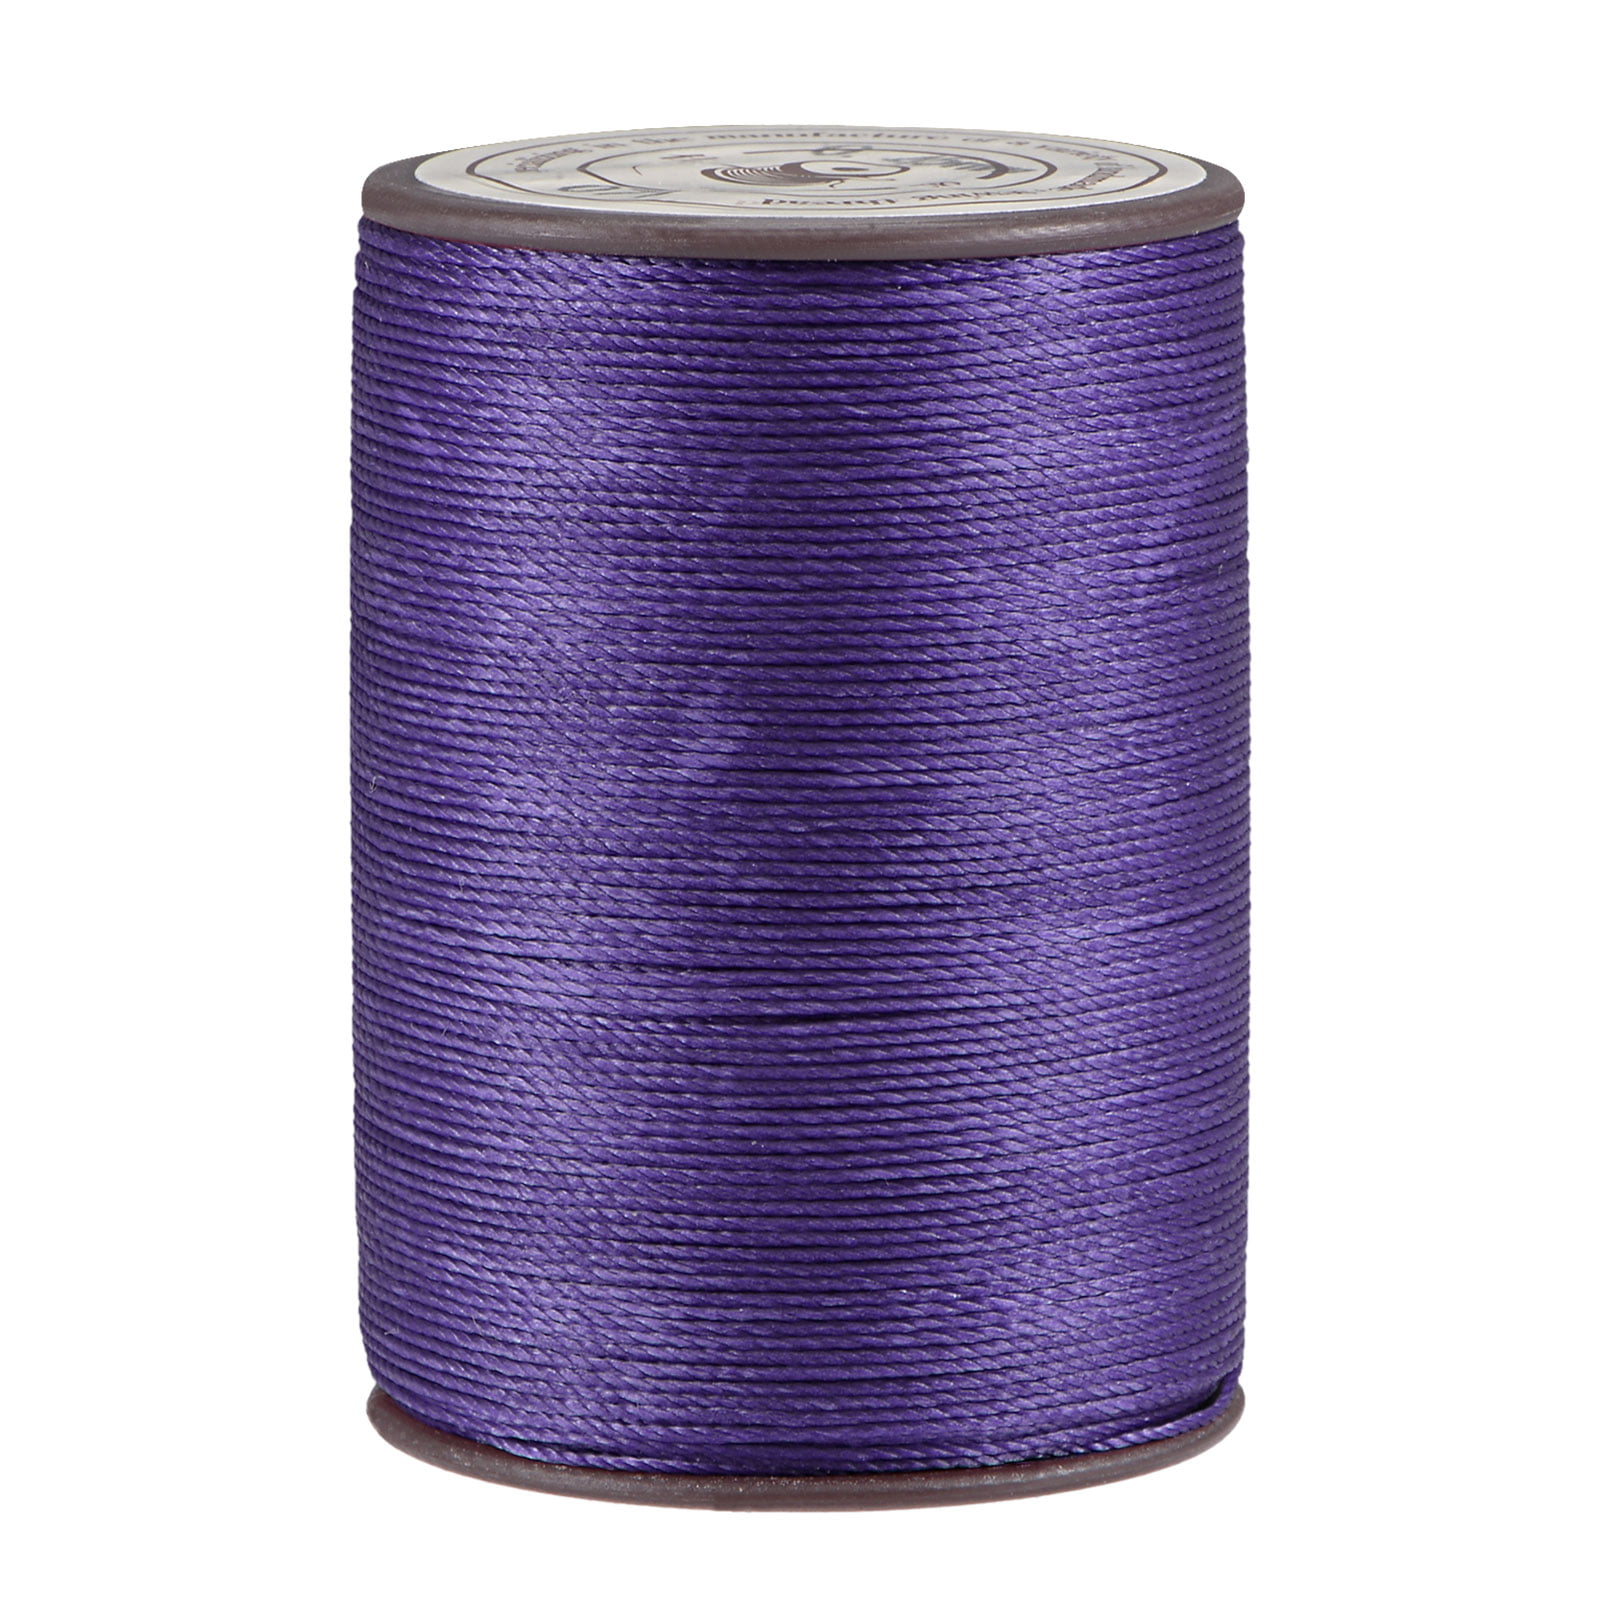  Waxed Thread Cord, Pink Polyester Thin Waxed Thread Wax String  Cord for Machine Sewing Embroidery Hand Quilting Weaving